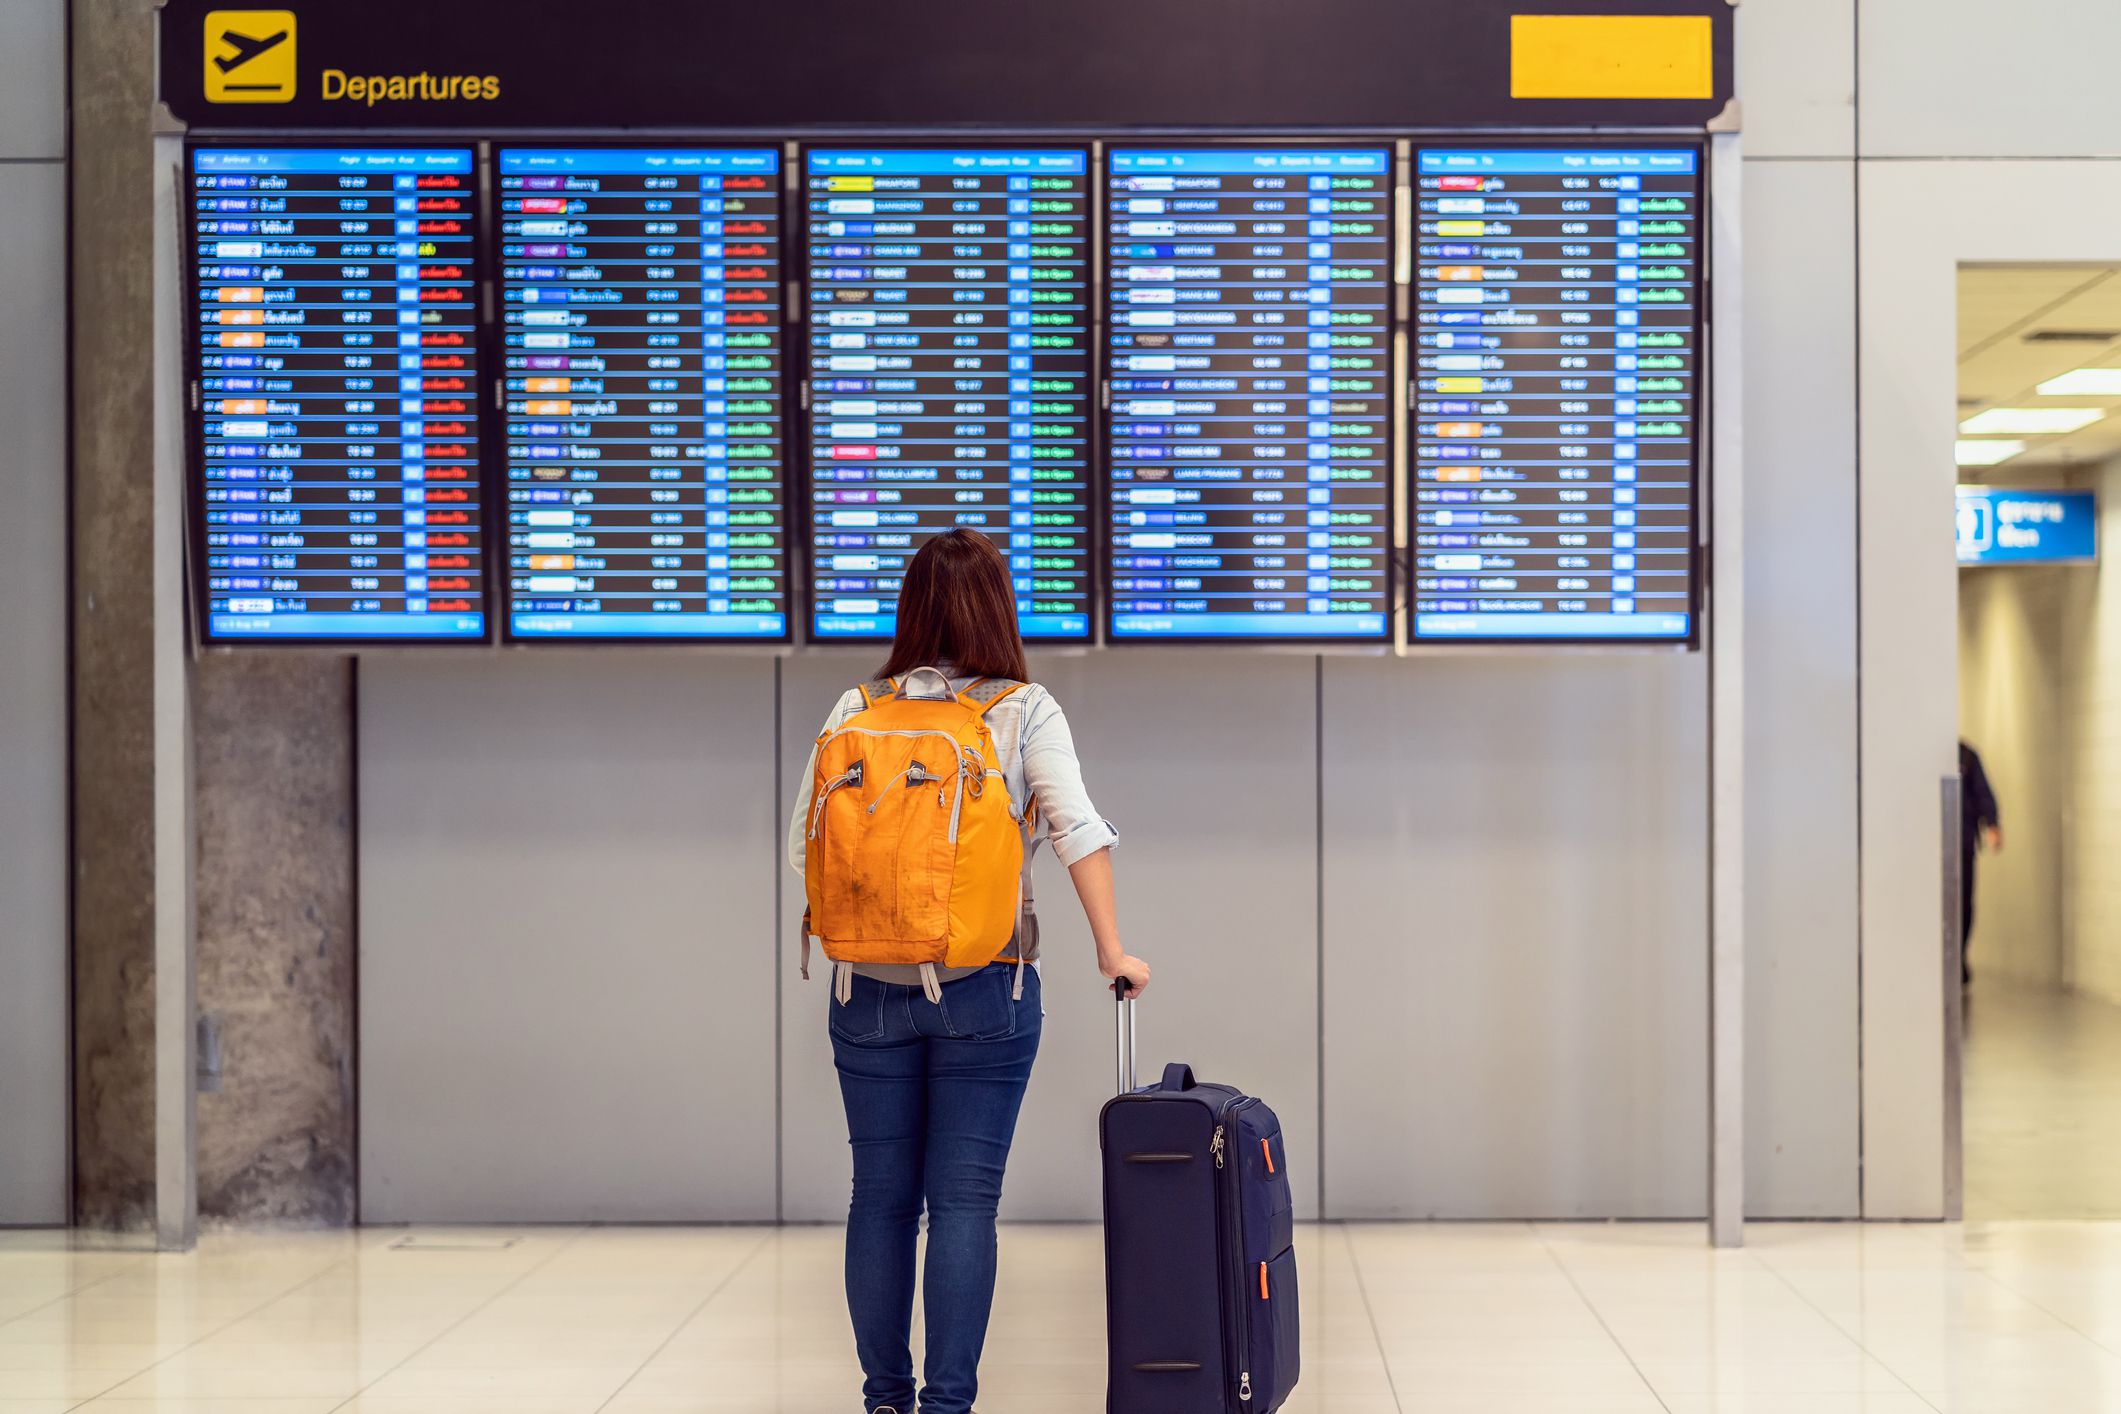 <div class="rich-text"><p>It’s always been recommended that you arrive in plenty of time before your flight to complete all check-in procedures. These days, that’s even truer. Delta, for example, suggests you <a href="https://www.delta.com/us/en/check-in-security/check-in-time-requirements/domestic-check-in">arrive two hours</a> before takeoff for domestic flights. Check your carrier for specific details.   </p><p><b>Related: </b><a href="https://blog.cheapism.com/biggest-travel-mistakes/">Big Mistakes Every Novice Traveler Makes and How to Avoid Them</a></p></div>